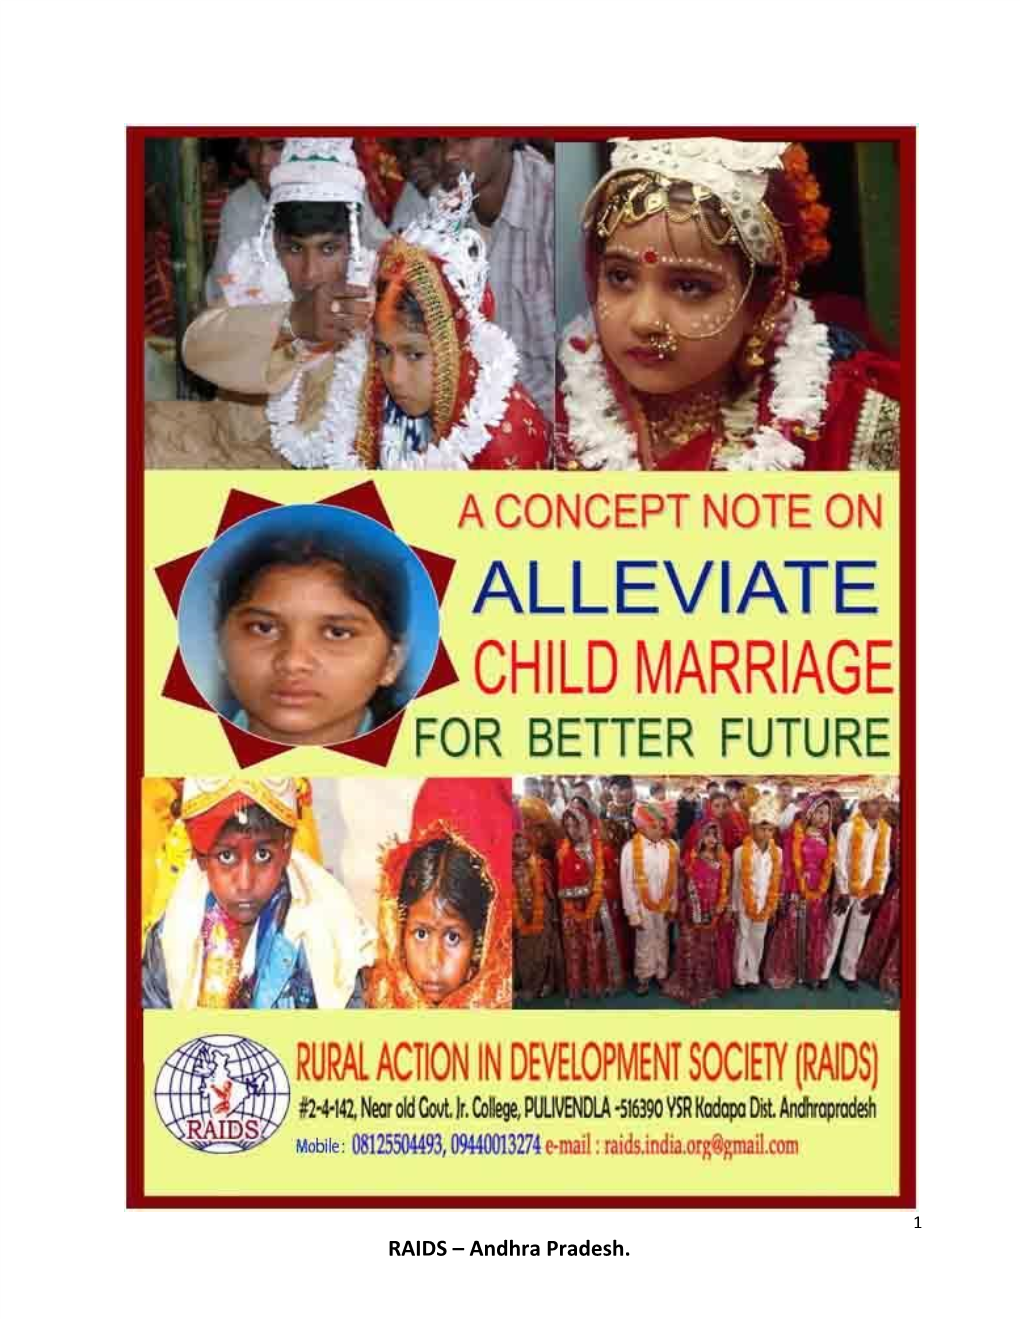 RAIDS – Andhra Pradesh, India. Alleviate Child Marriages for Better Future 1